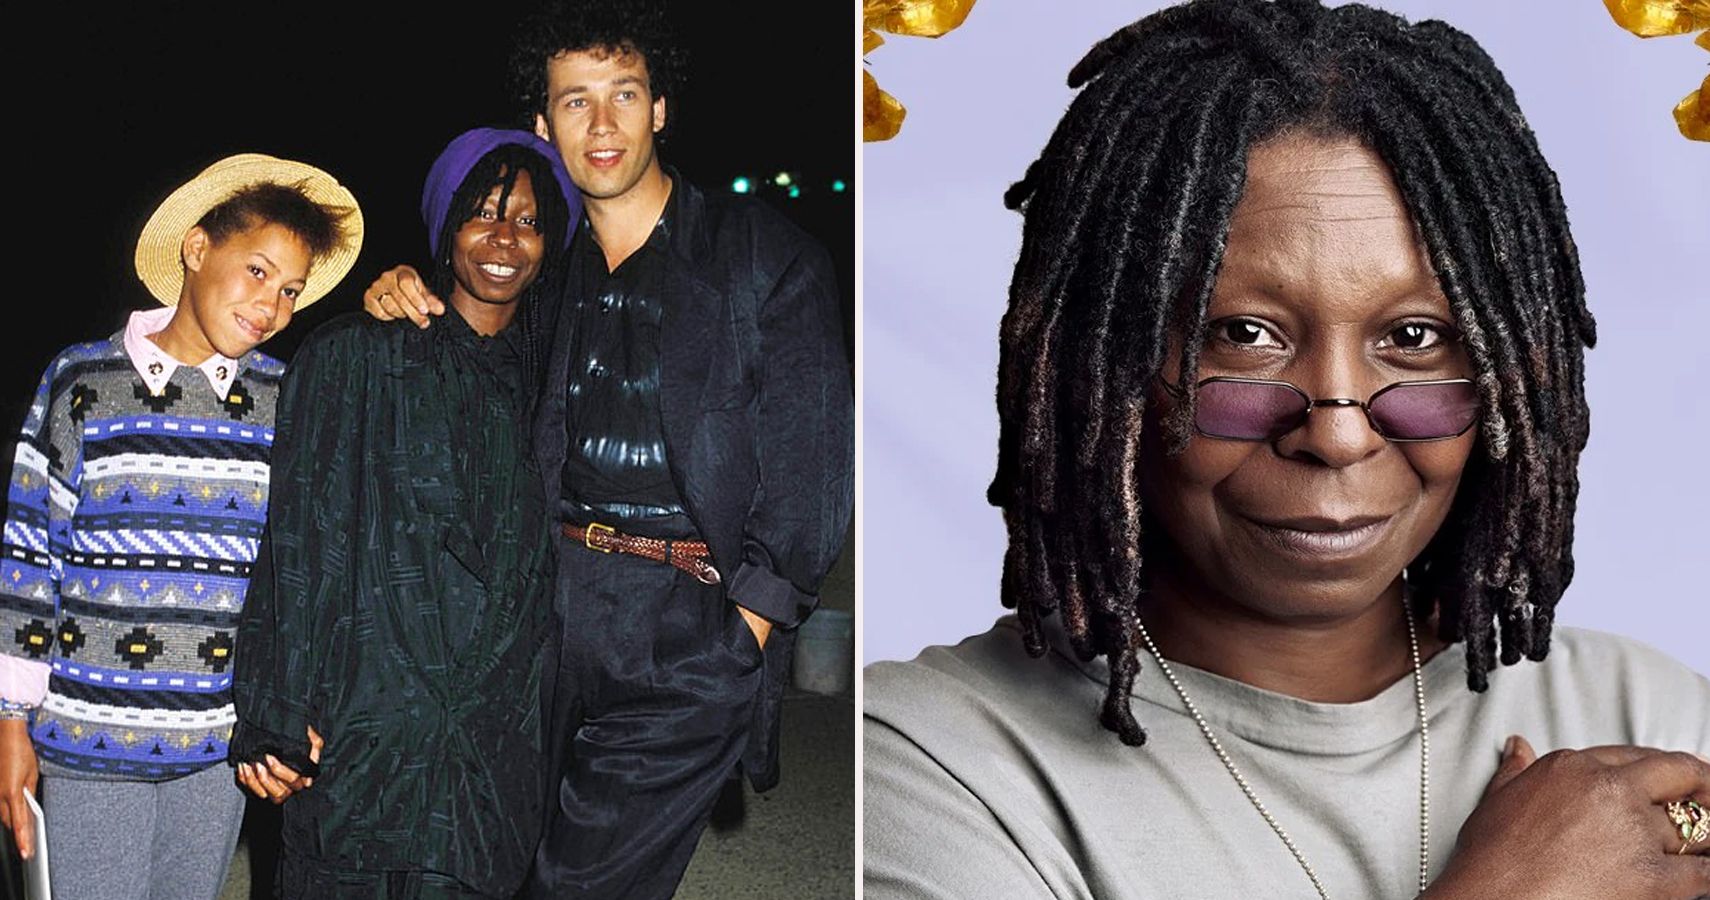 Whoopi Goldberg Used To Be A Drug Addict... Now Shes Thriving